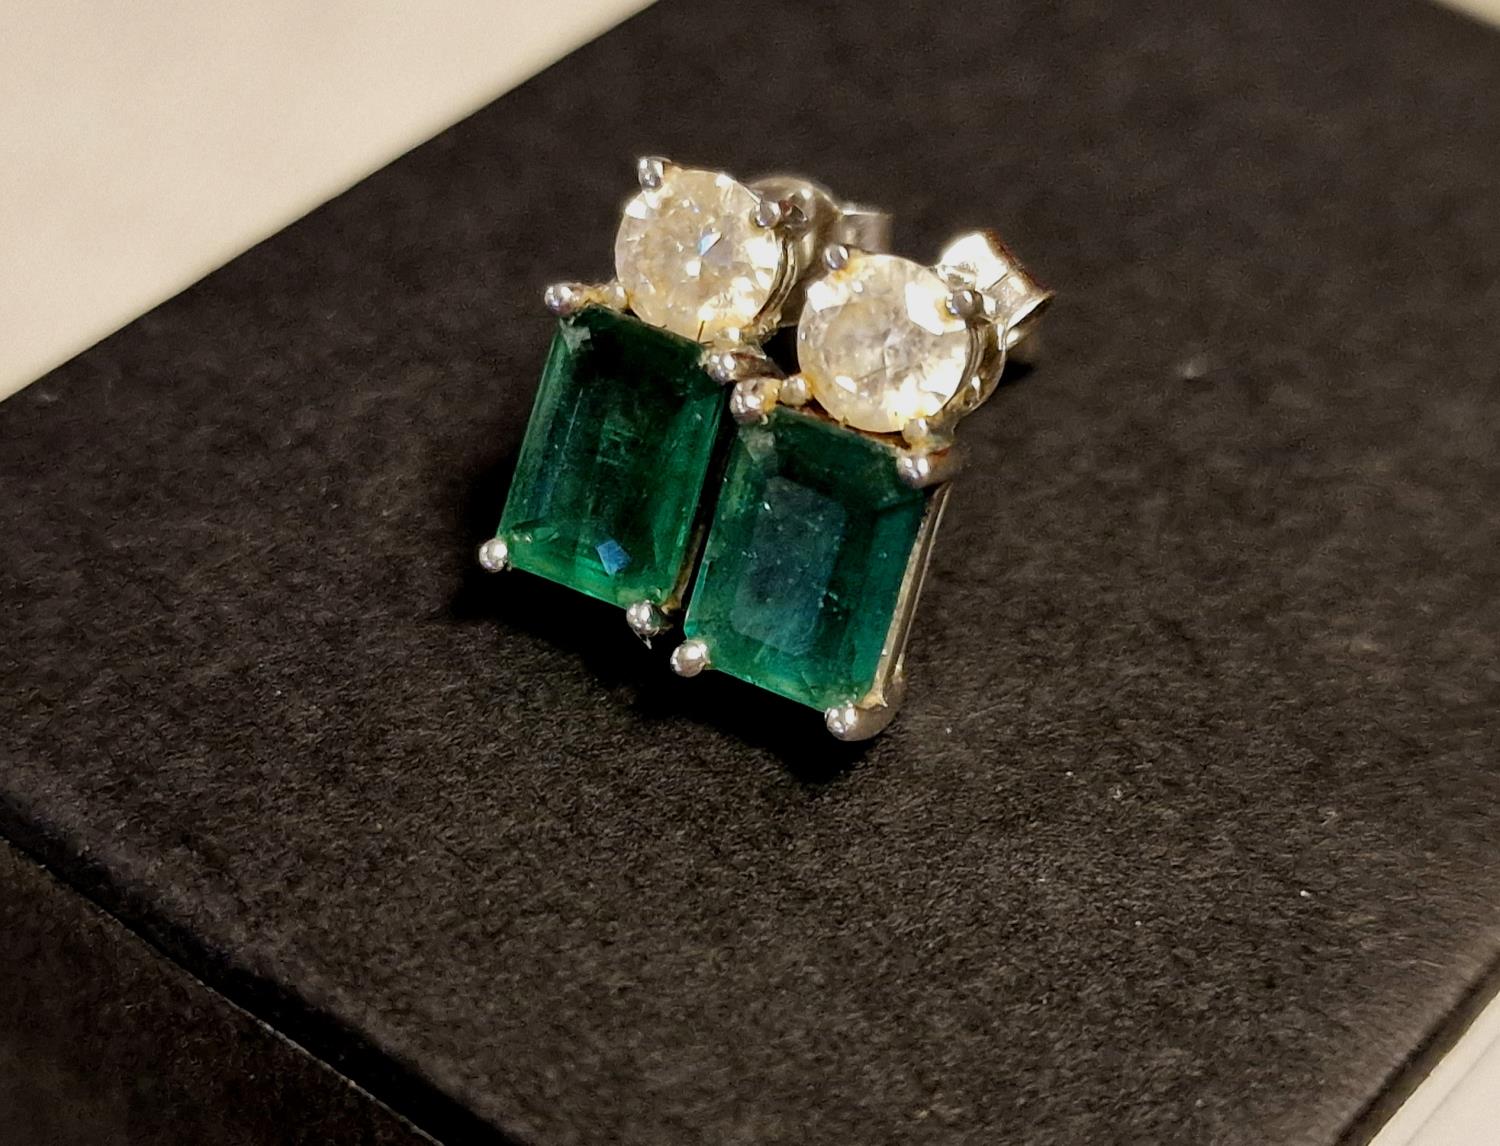 Pair of 18ct White Gold, Emerald & Diamond Stud Earrings - each set with single 1ct emerald cut ston